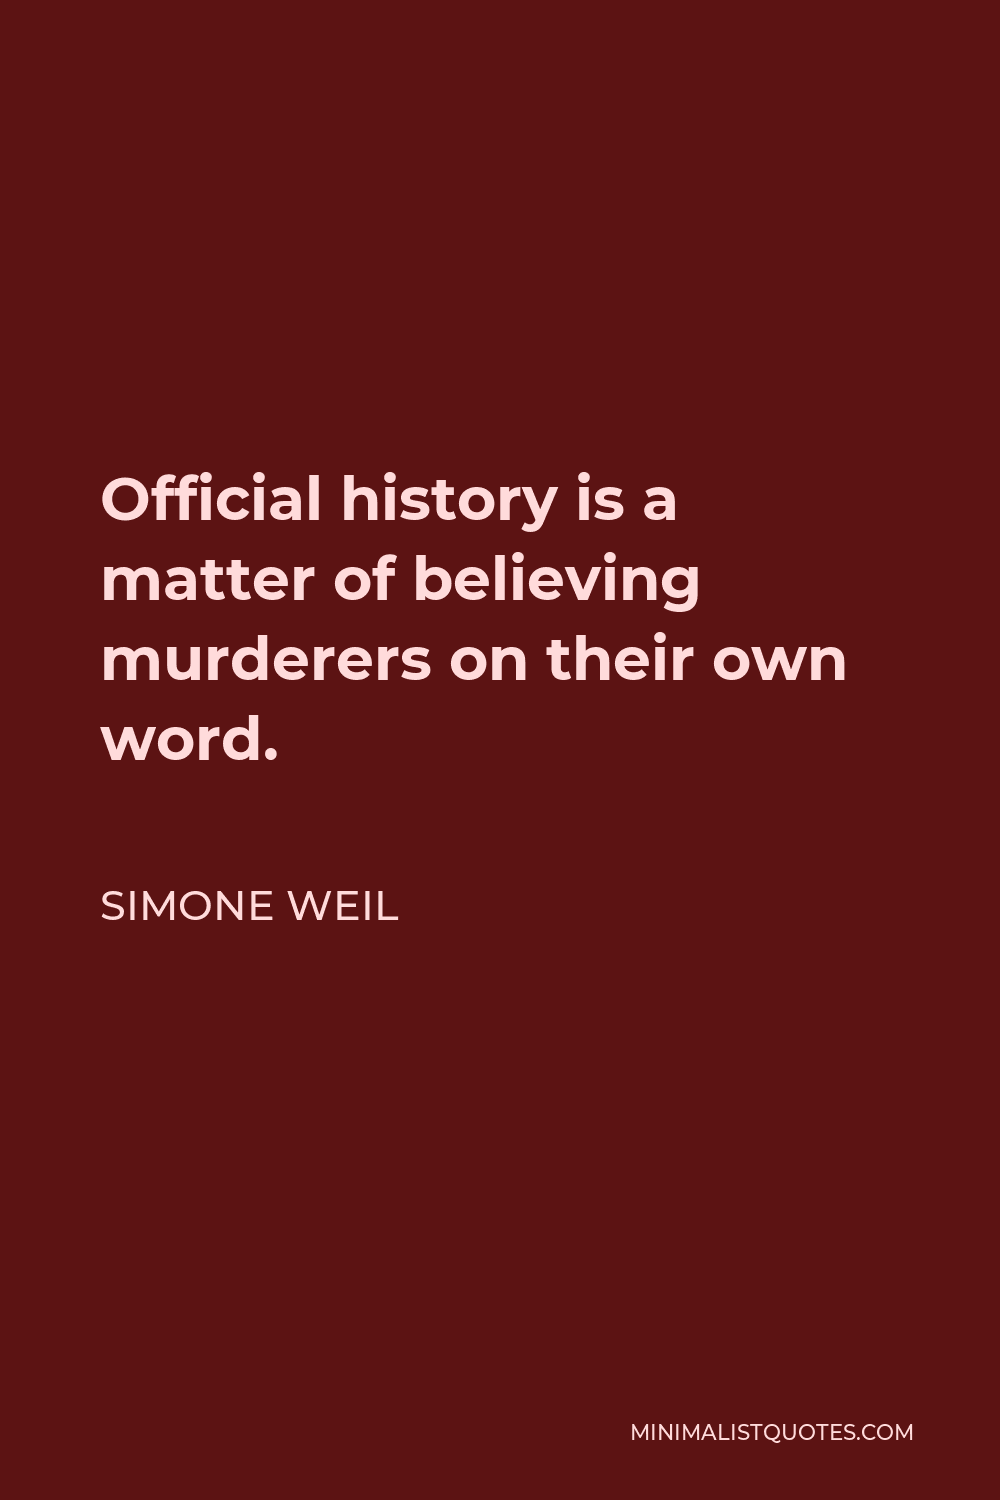 Simone Weil Quote - Official history is a matter of believing murderers on their own word.